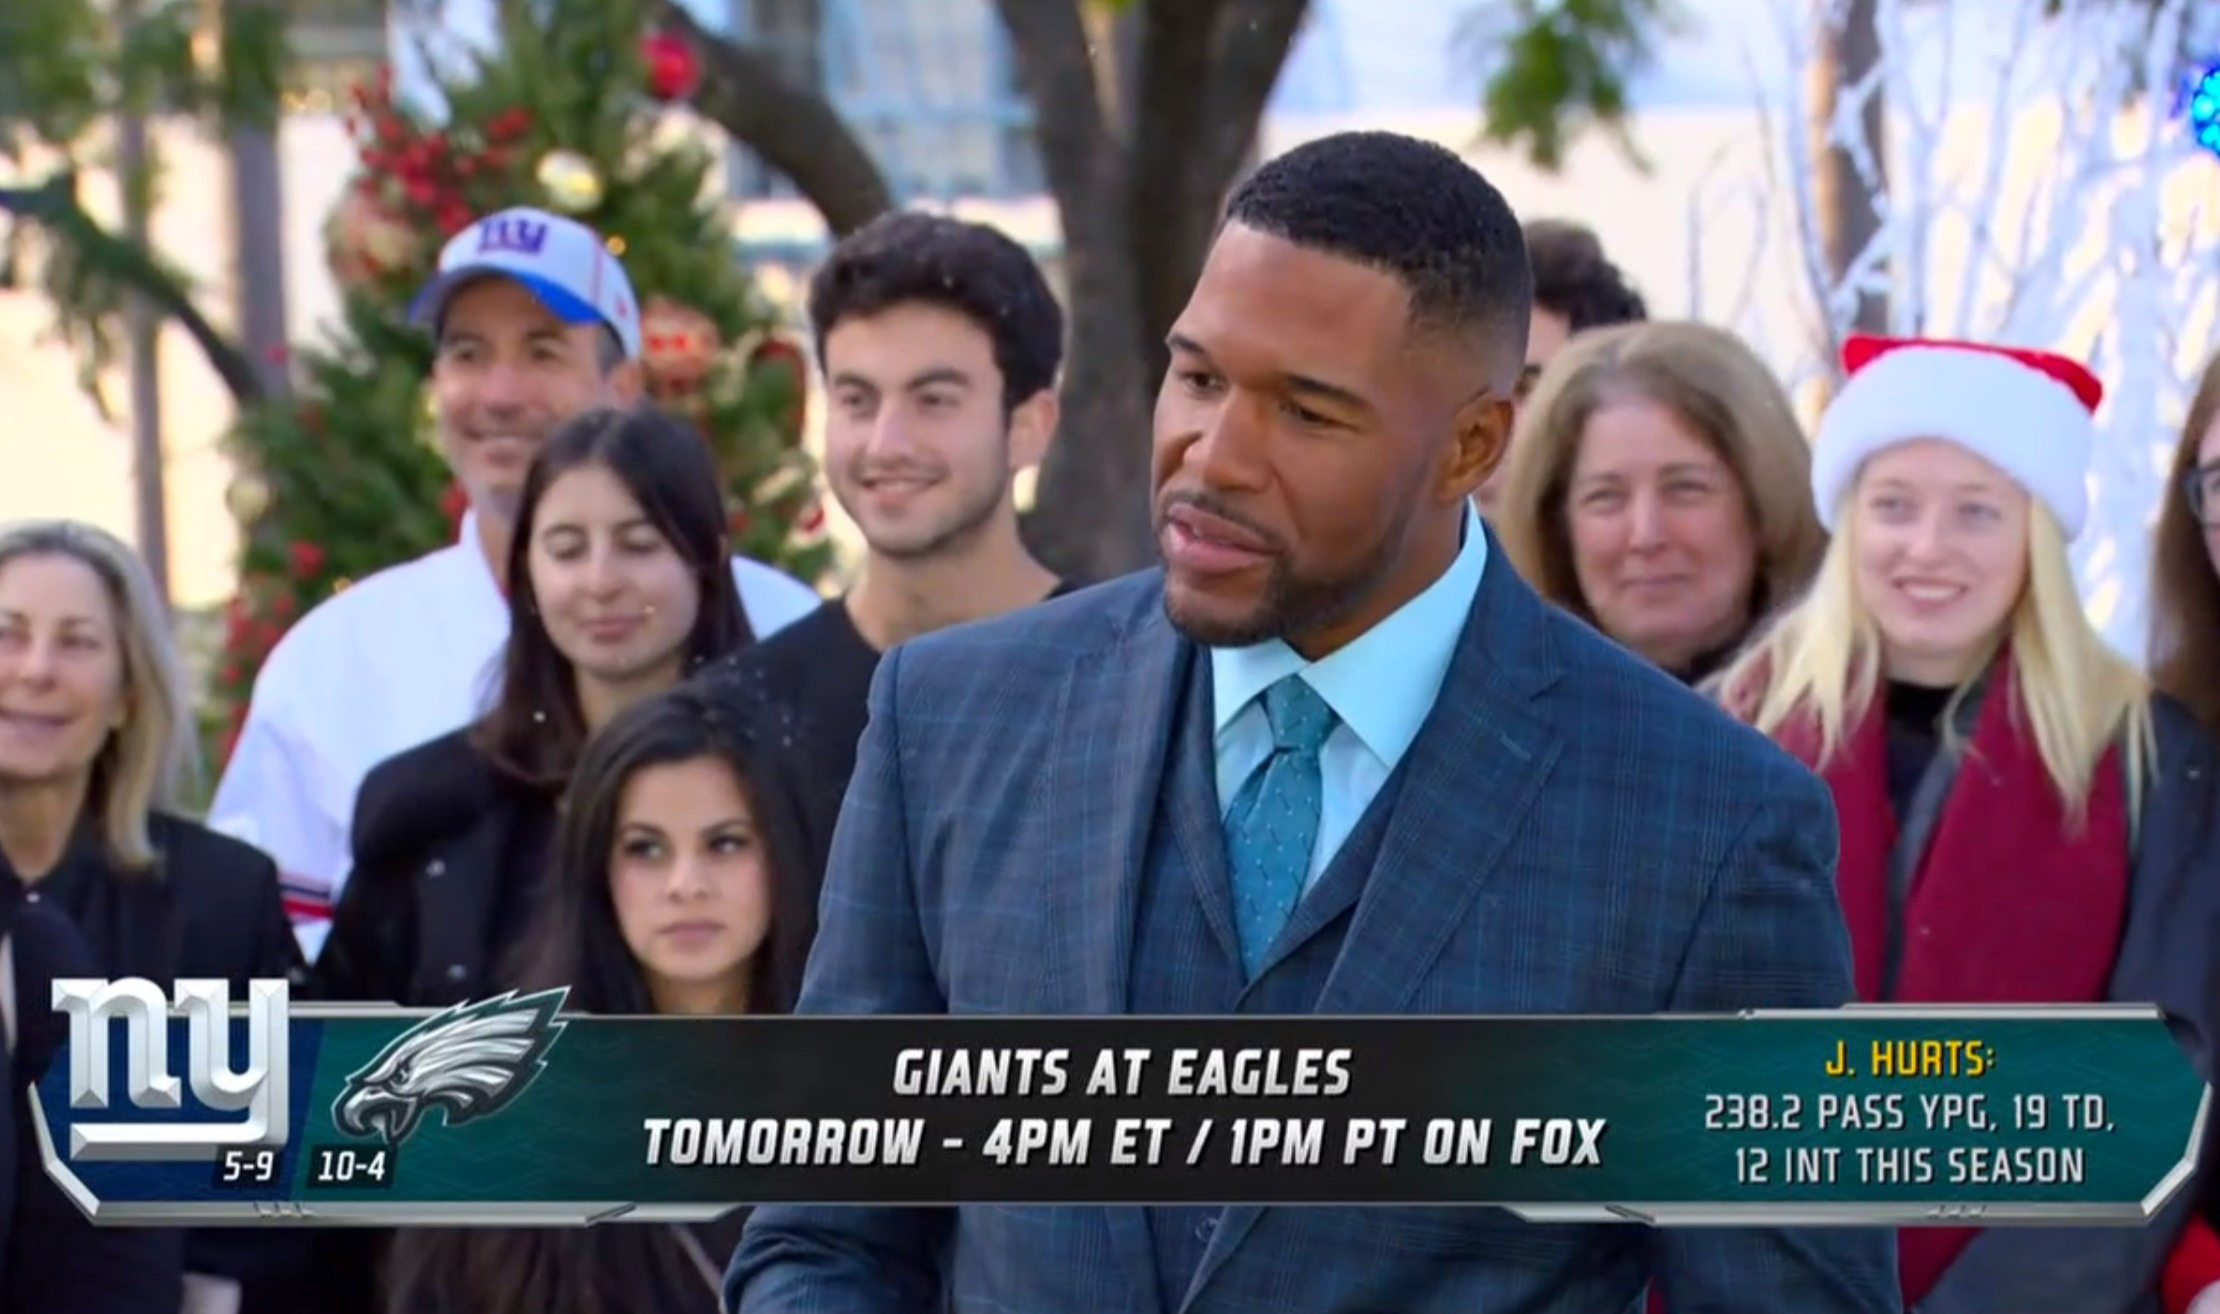 Michael Strahan worked Christmas Eve, though, during his usual spot on Fox NFL Sunday